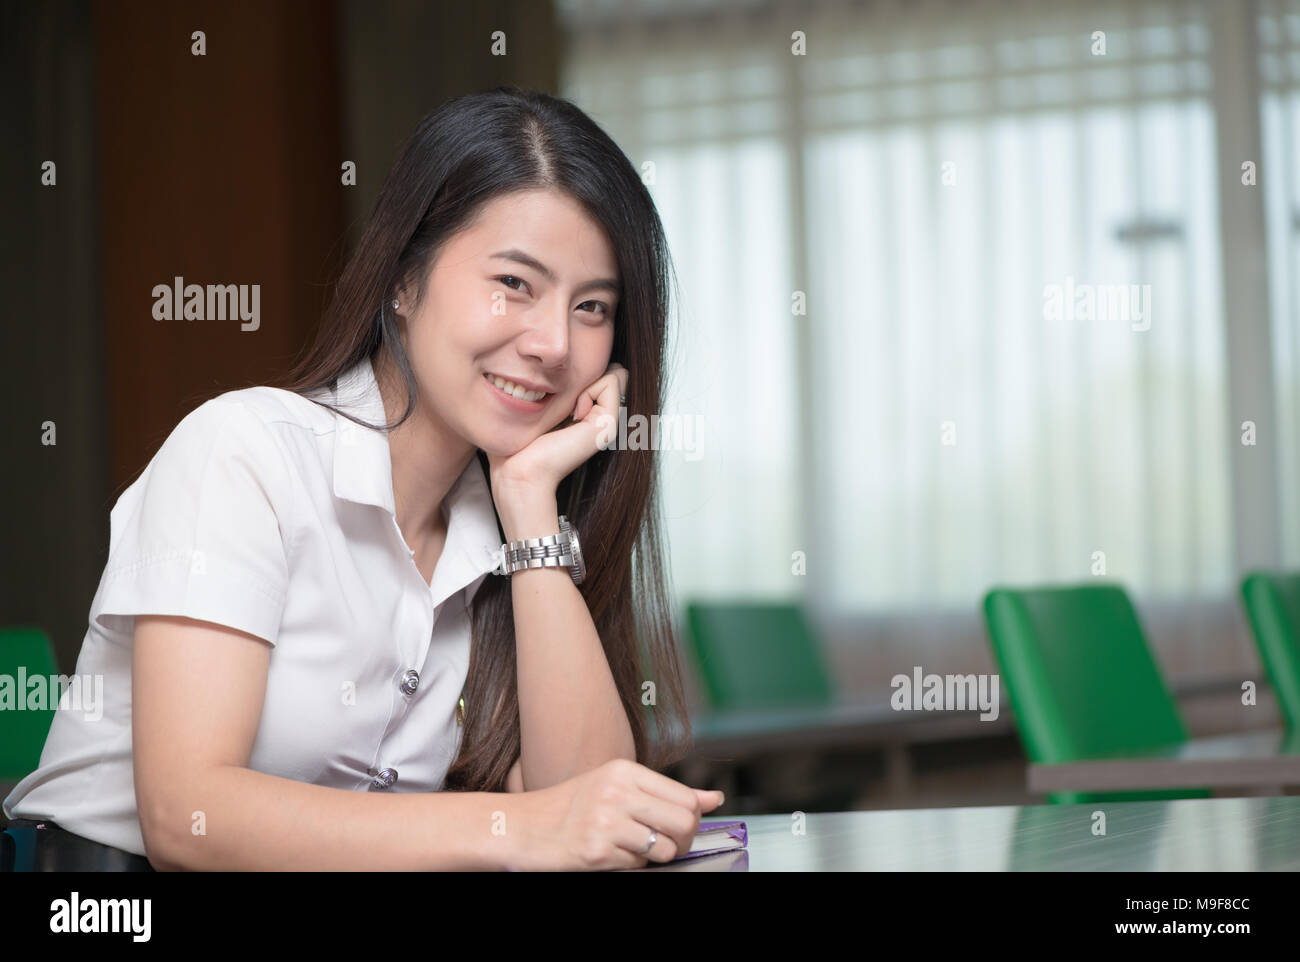 cute young asian student in uniform smile and sit in classroom, education and learning concept Stock Photo